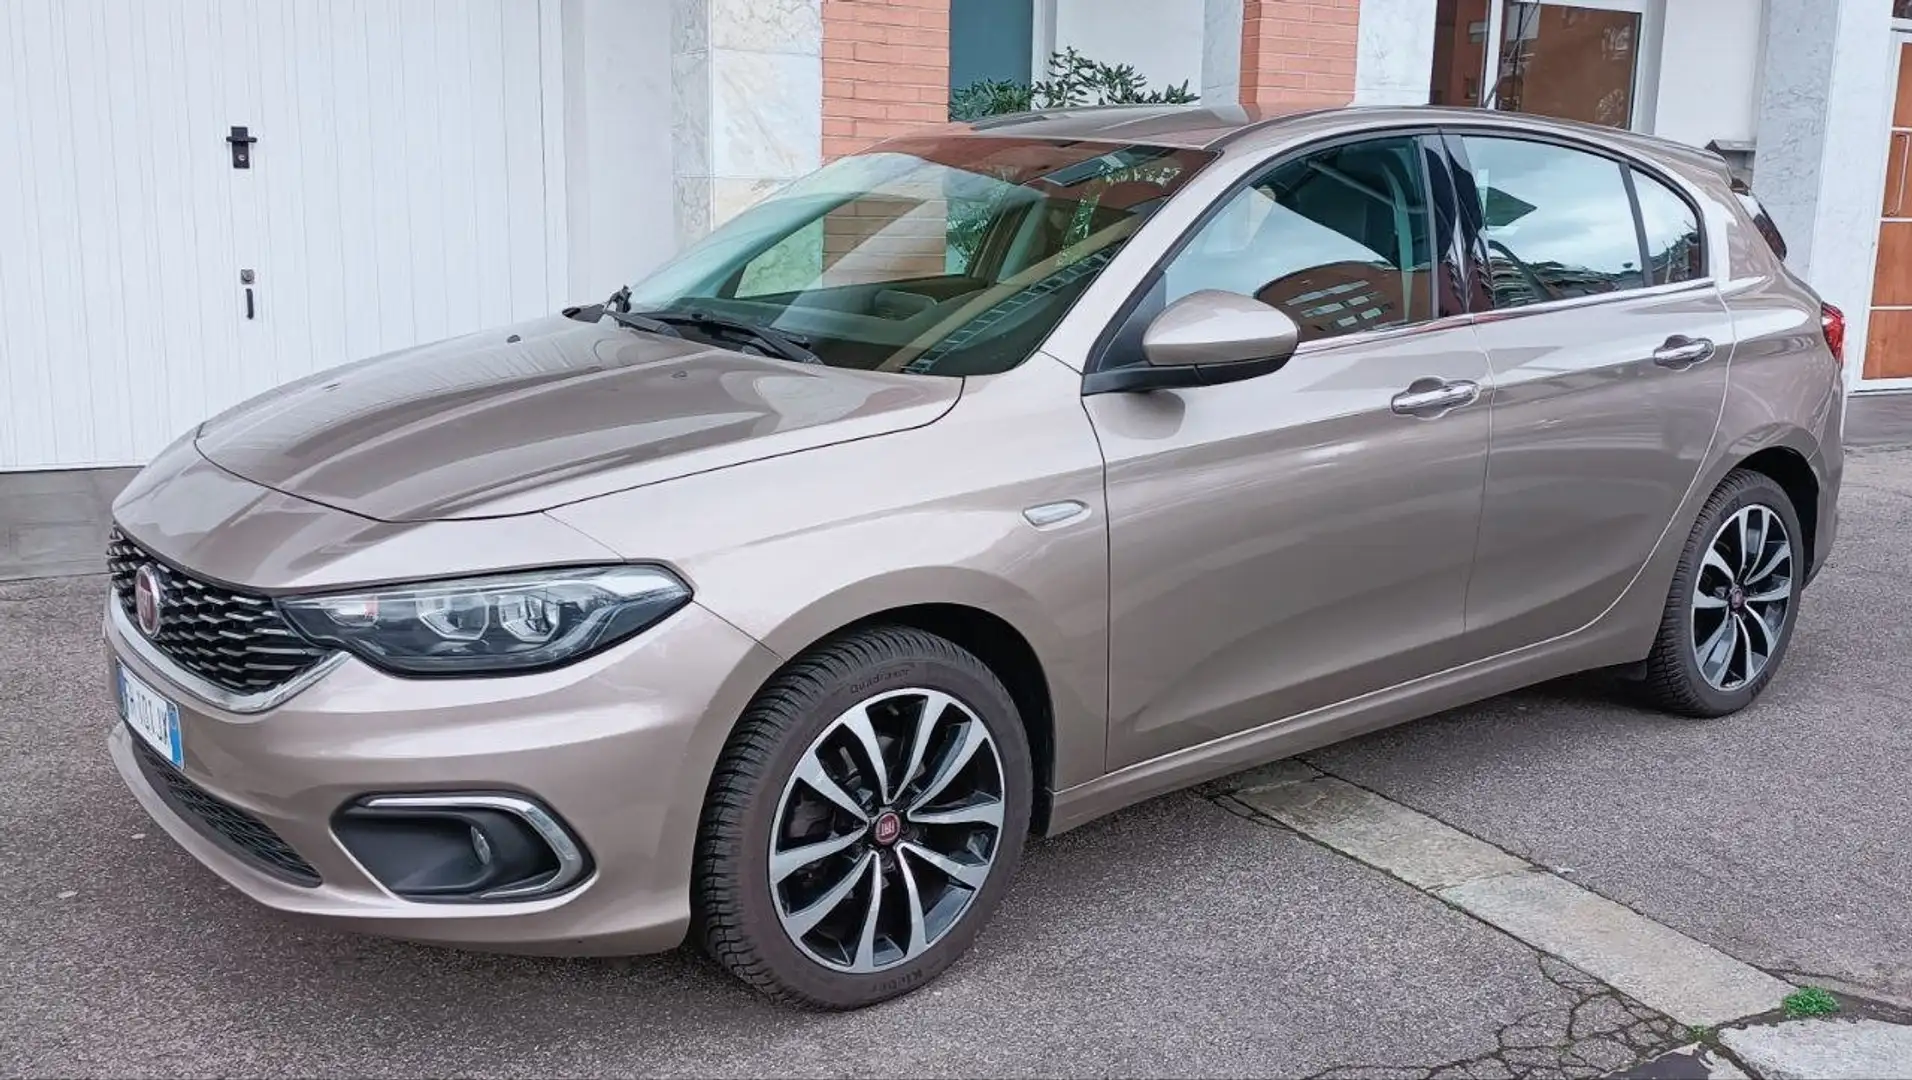 Fiat Tipo Tipo 5p 1.4 tjt Lounge Gpl 120cv Beżowy - 1